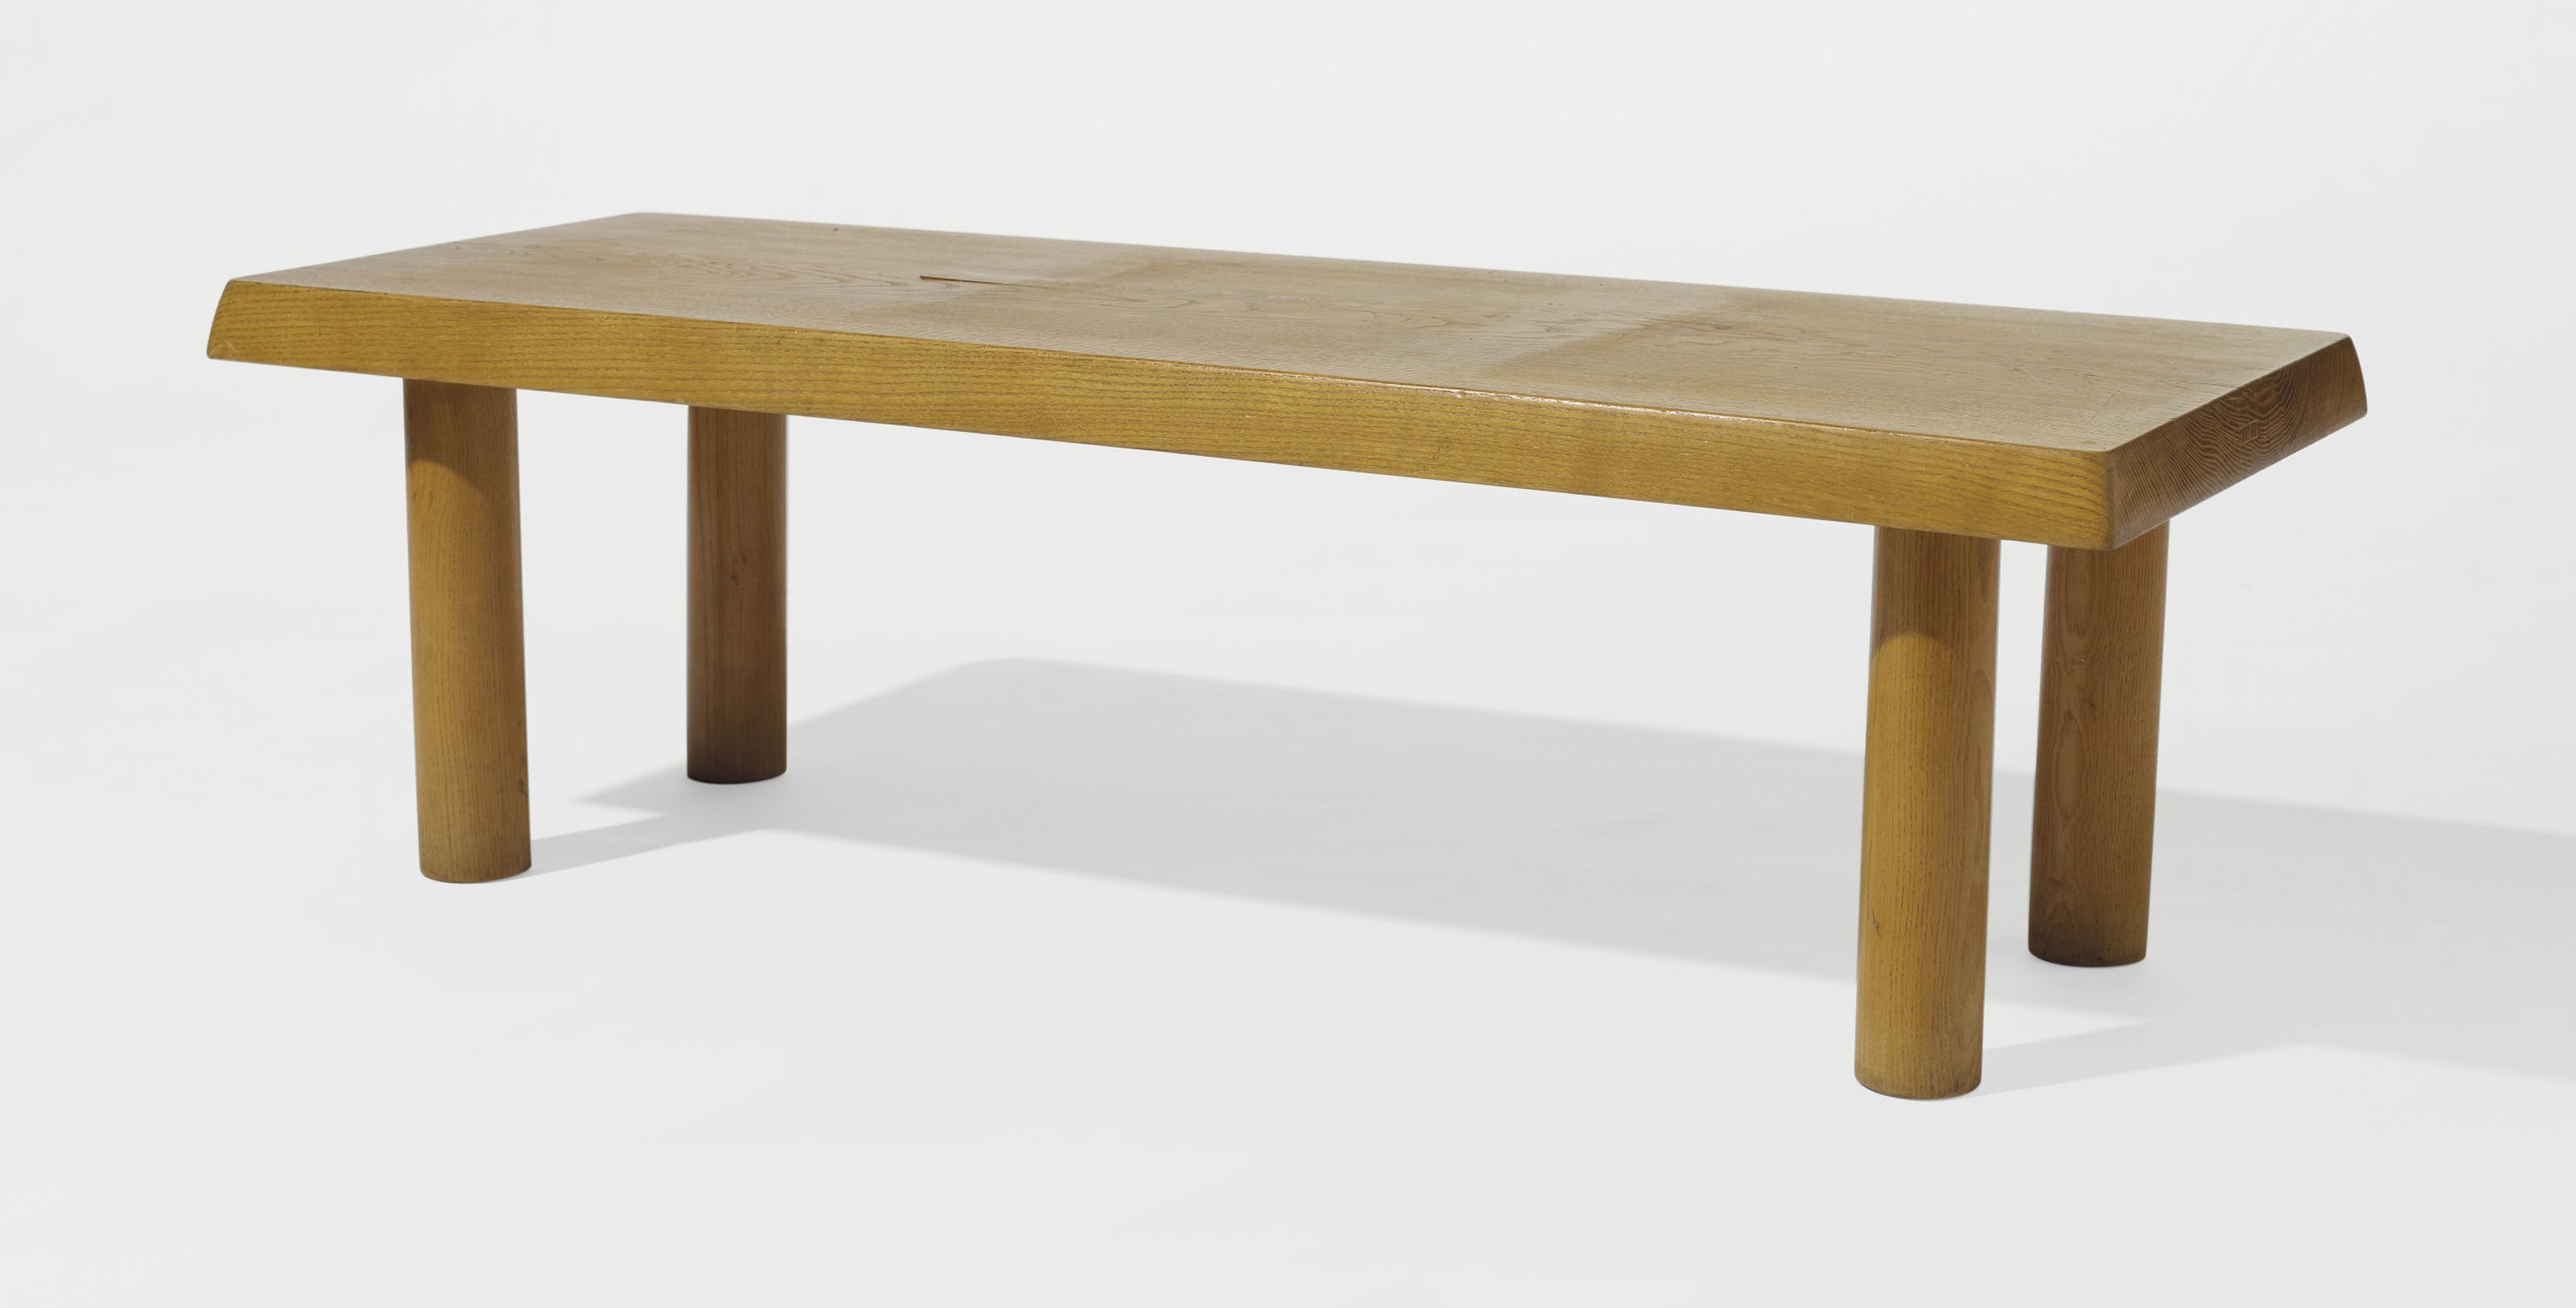 Charlotte Perriand, TABLE 'FORME LIBRE' (1956 - 1970)